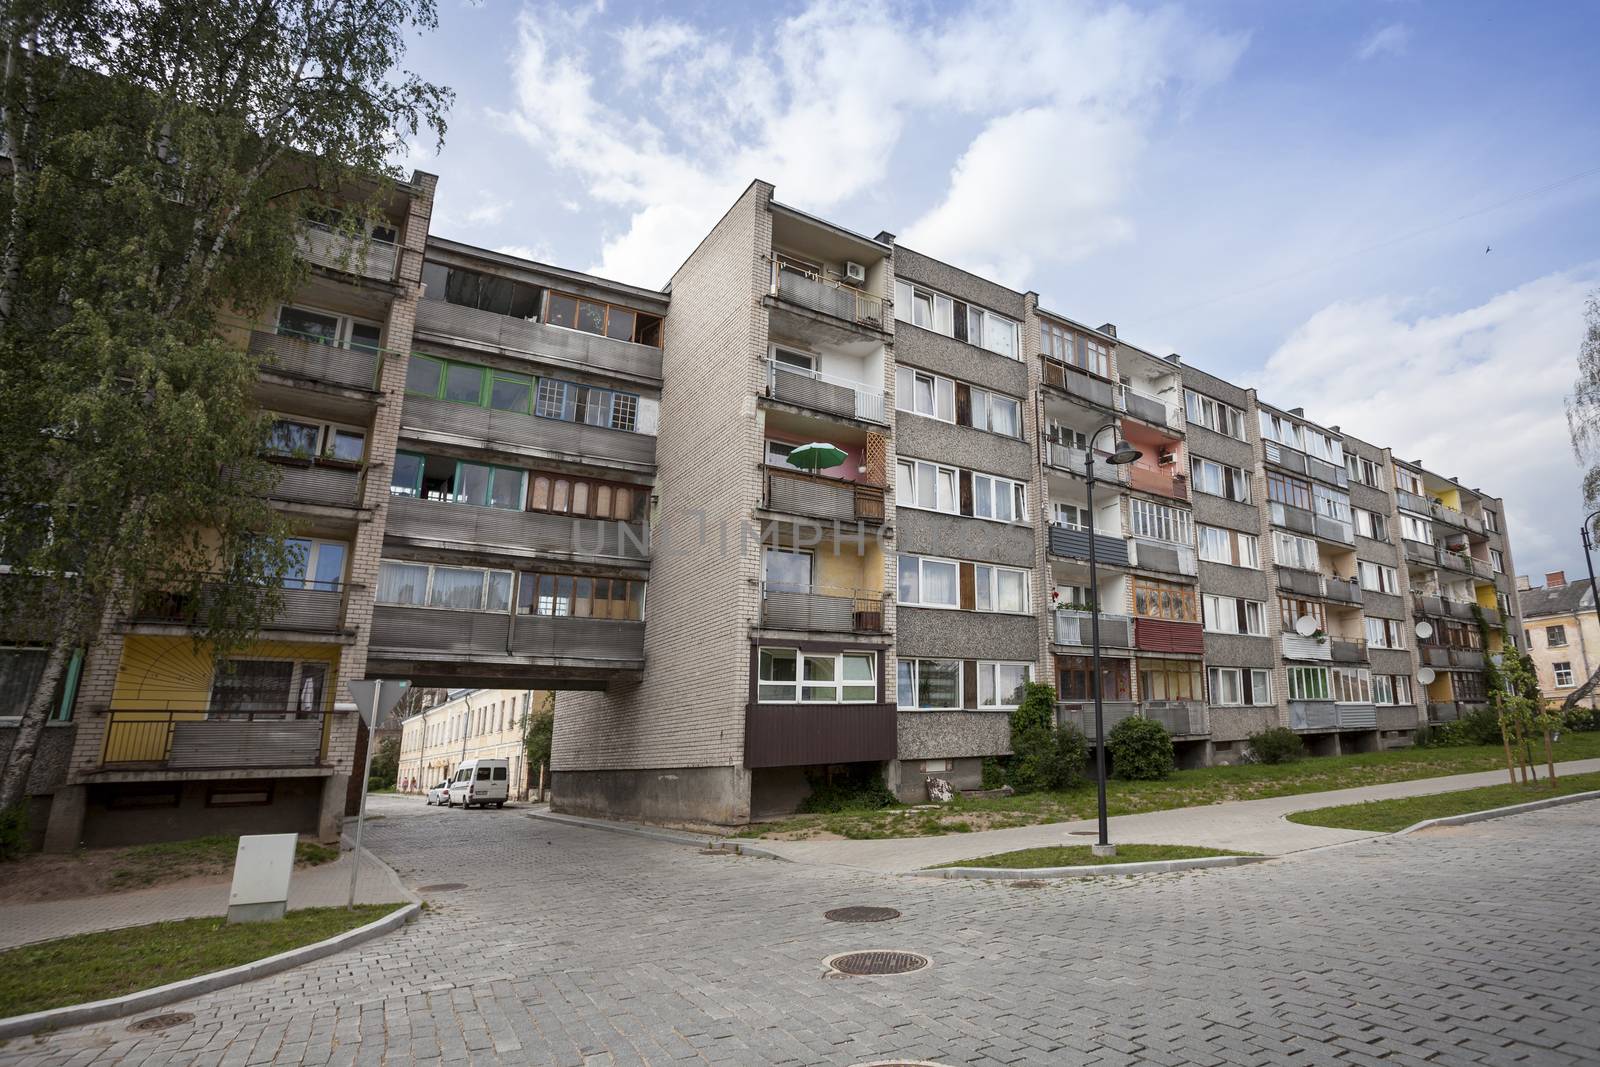 Old Soviet Block apartments by ints